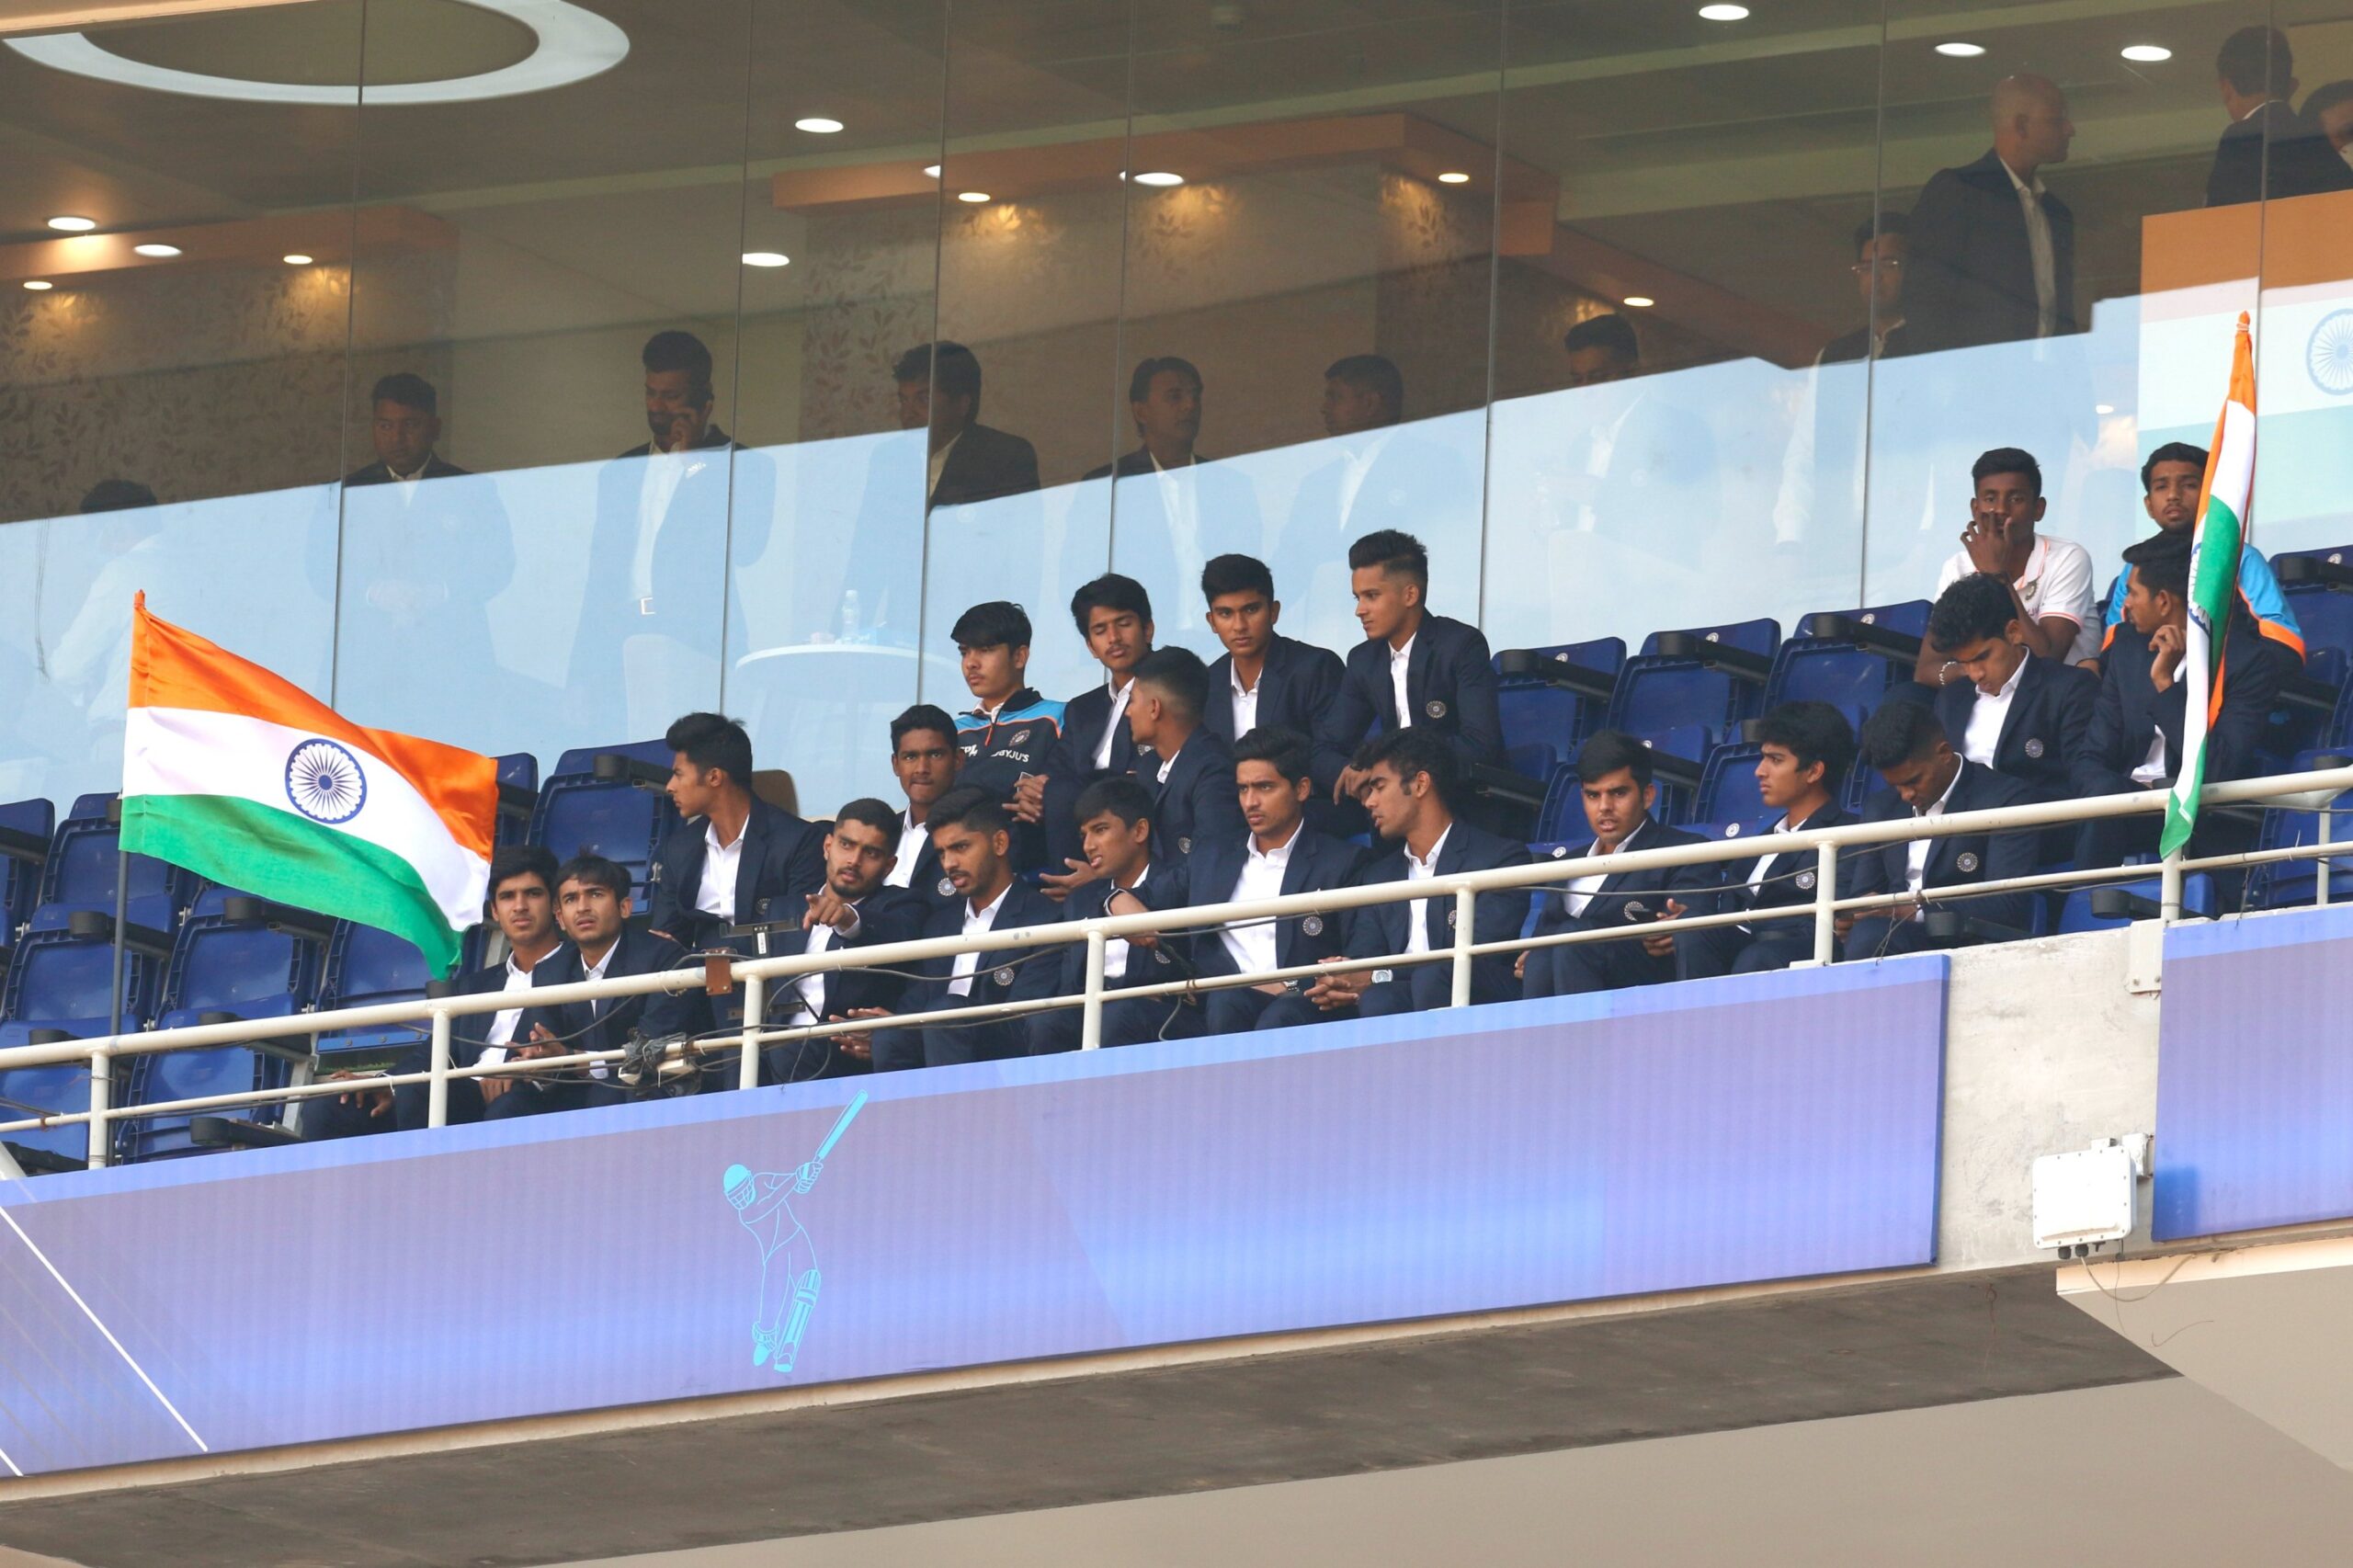  The India U19 World Cup-winning squad is in Ahmedabad to see India vs. West Indies in the 2nd ODI.